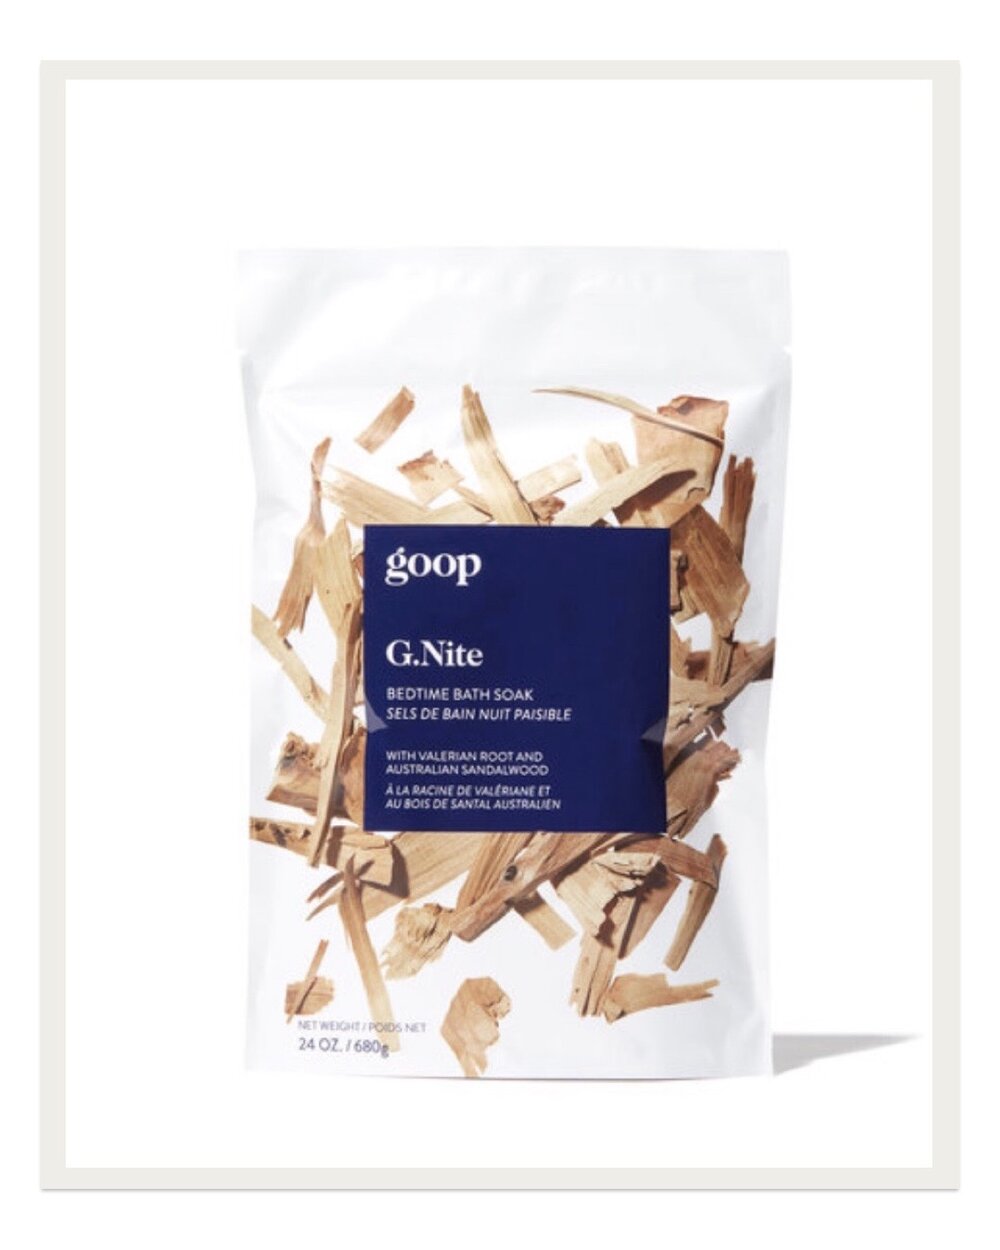 My favorite form of self-care is an embarrassingly long bath, and my favorite bathtime indulgence is definitely a fancy salt soak. I adore this bedtime soak from Goop that uses valerian root and sandalwood to diffuse the most satisfying and snooze-inducing scents tor a peaceful transition into bed.